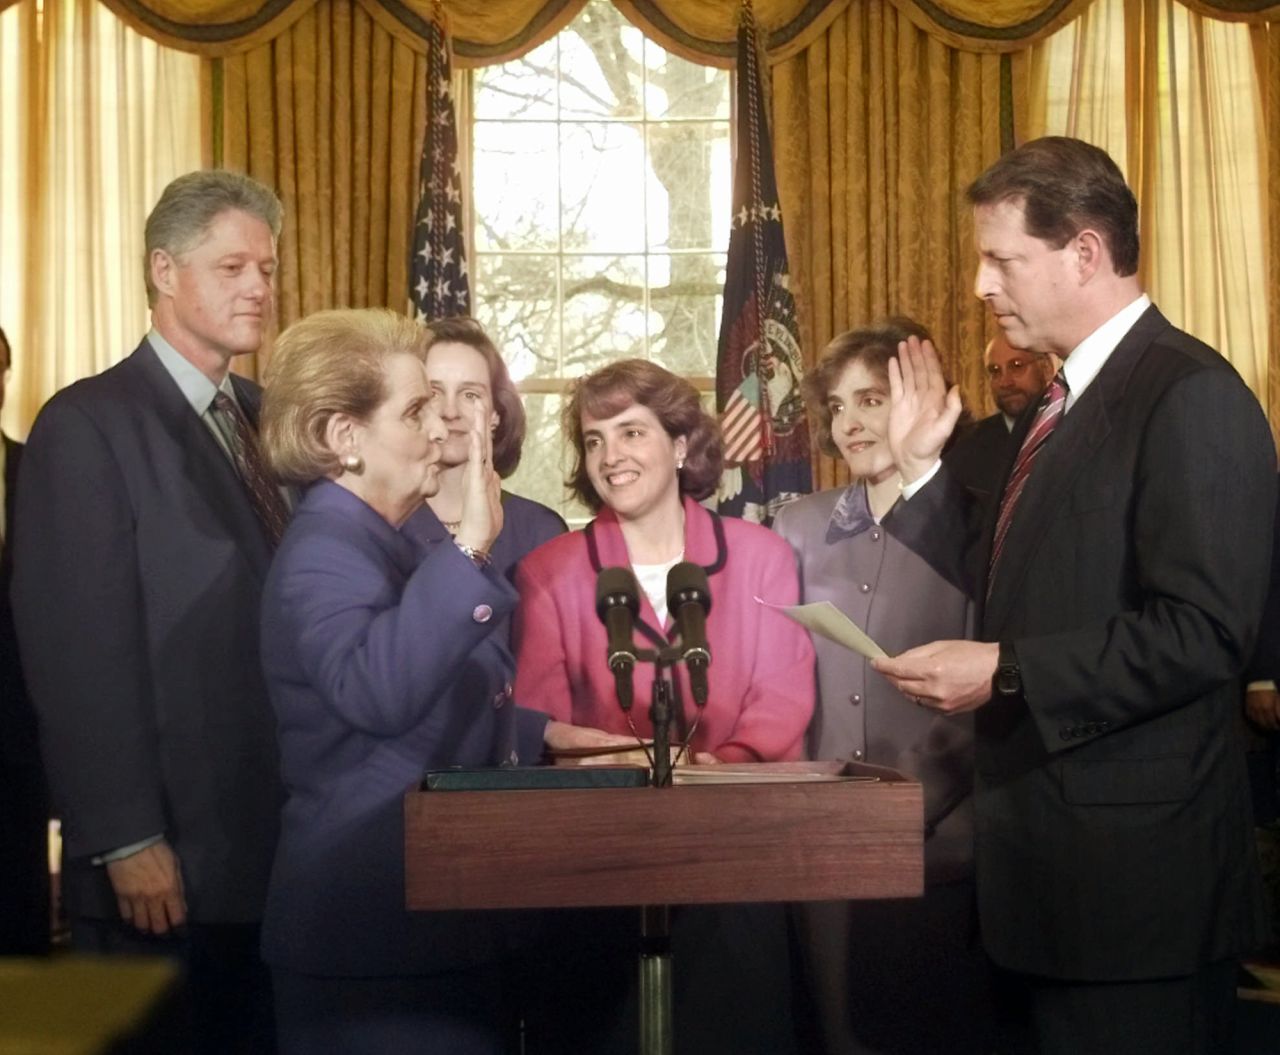 Madeleine Albright is sworn in as the first female secretary of state after a rapid-fire Senate confirmation in 1997. President Bill Clinton nominated Albright for the position four years after he chose Janet Reno as the first female US attorney general. Speaking to <a href="https://www.huffpost.com/entry/madeleine-albright-an-exc_b_604418" target="_blank" target="_blank">the Huffington Post</a> in 2010, Albright said, "The reason I made women's issues central to American foreign policy was not because I was a feminist, but because we know that societies are more stable if women are politically and economically empowered." 